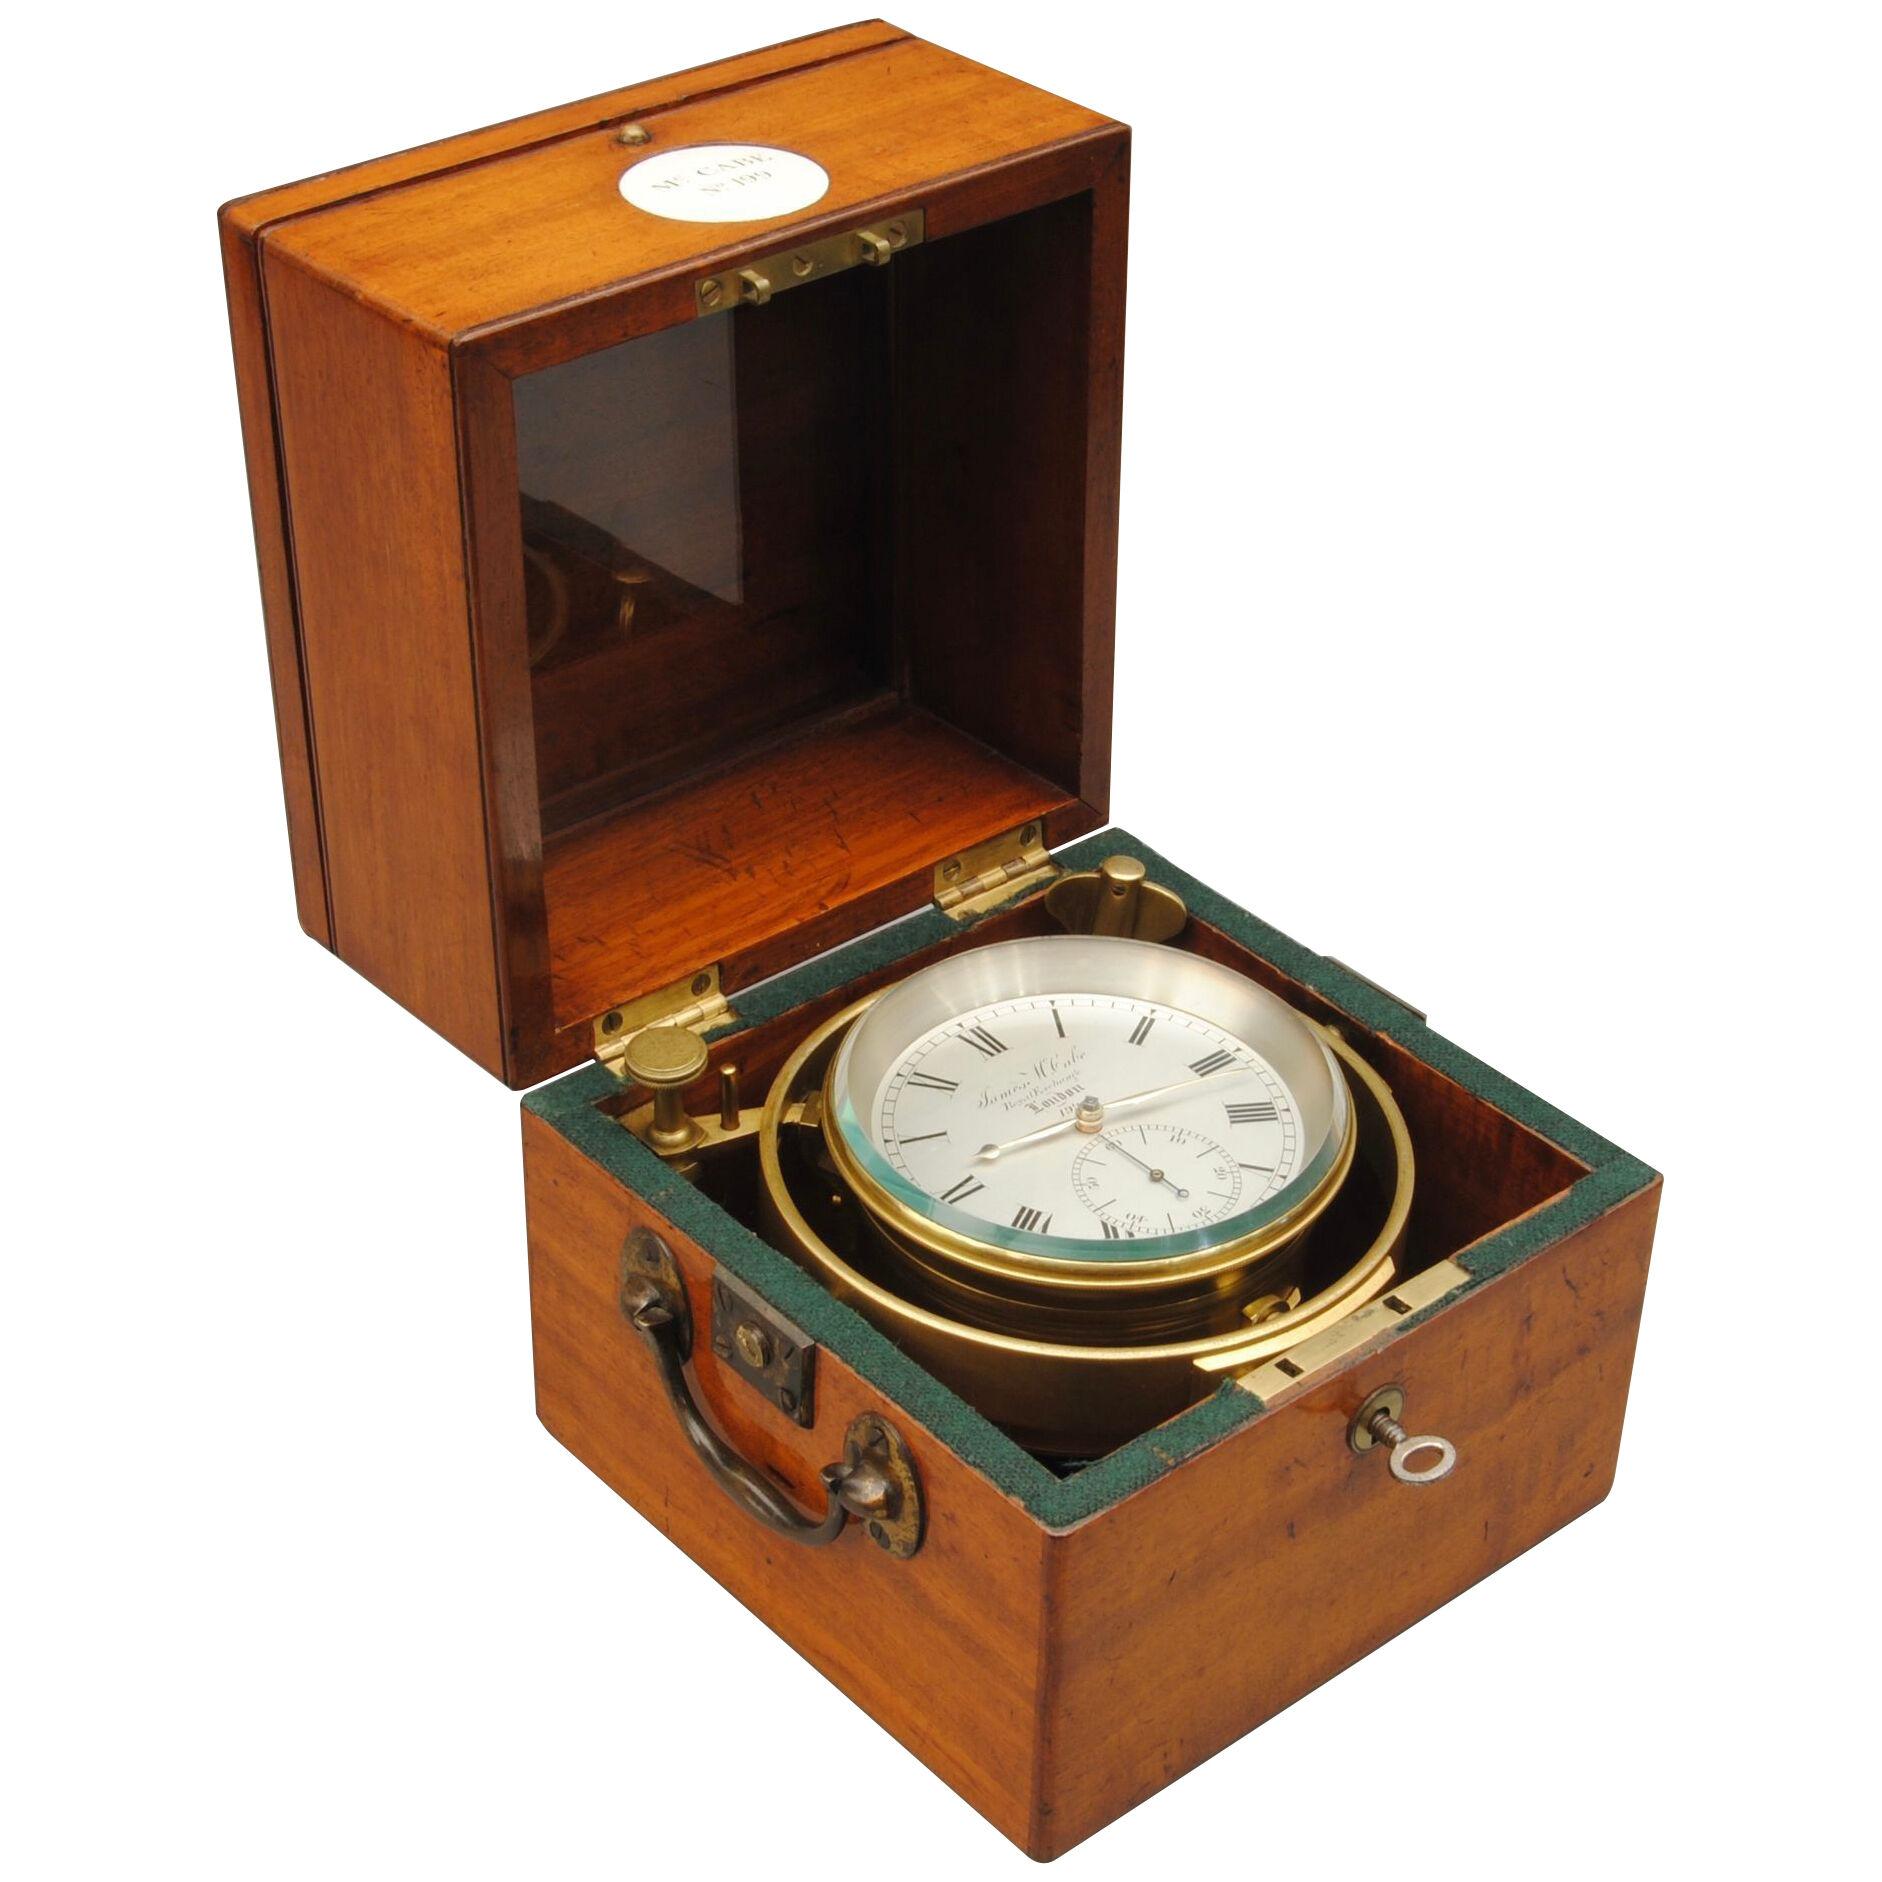 AN EARLY 19TH CENTURY 2 DAY MARINE CHRONOMETER BY JAMES MCCABE, NO. 199